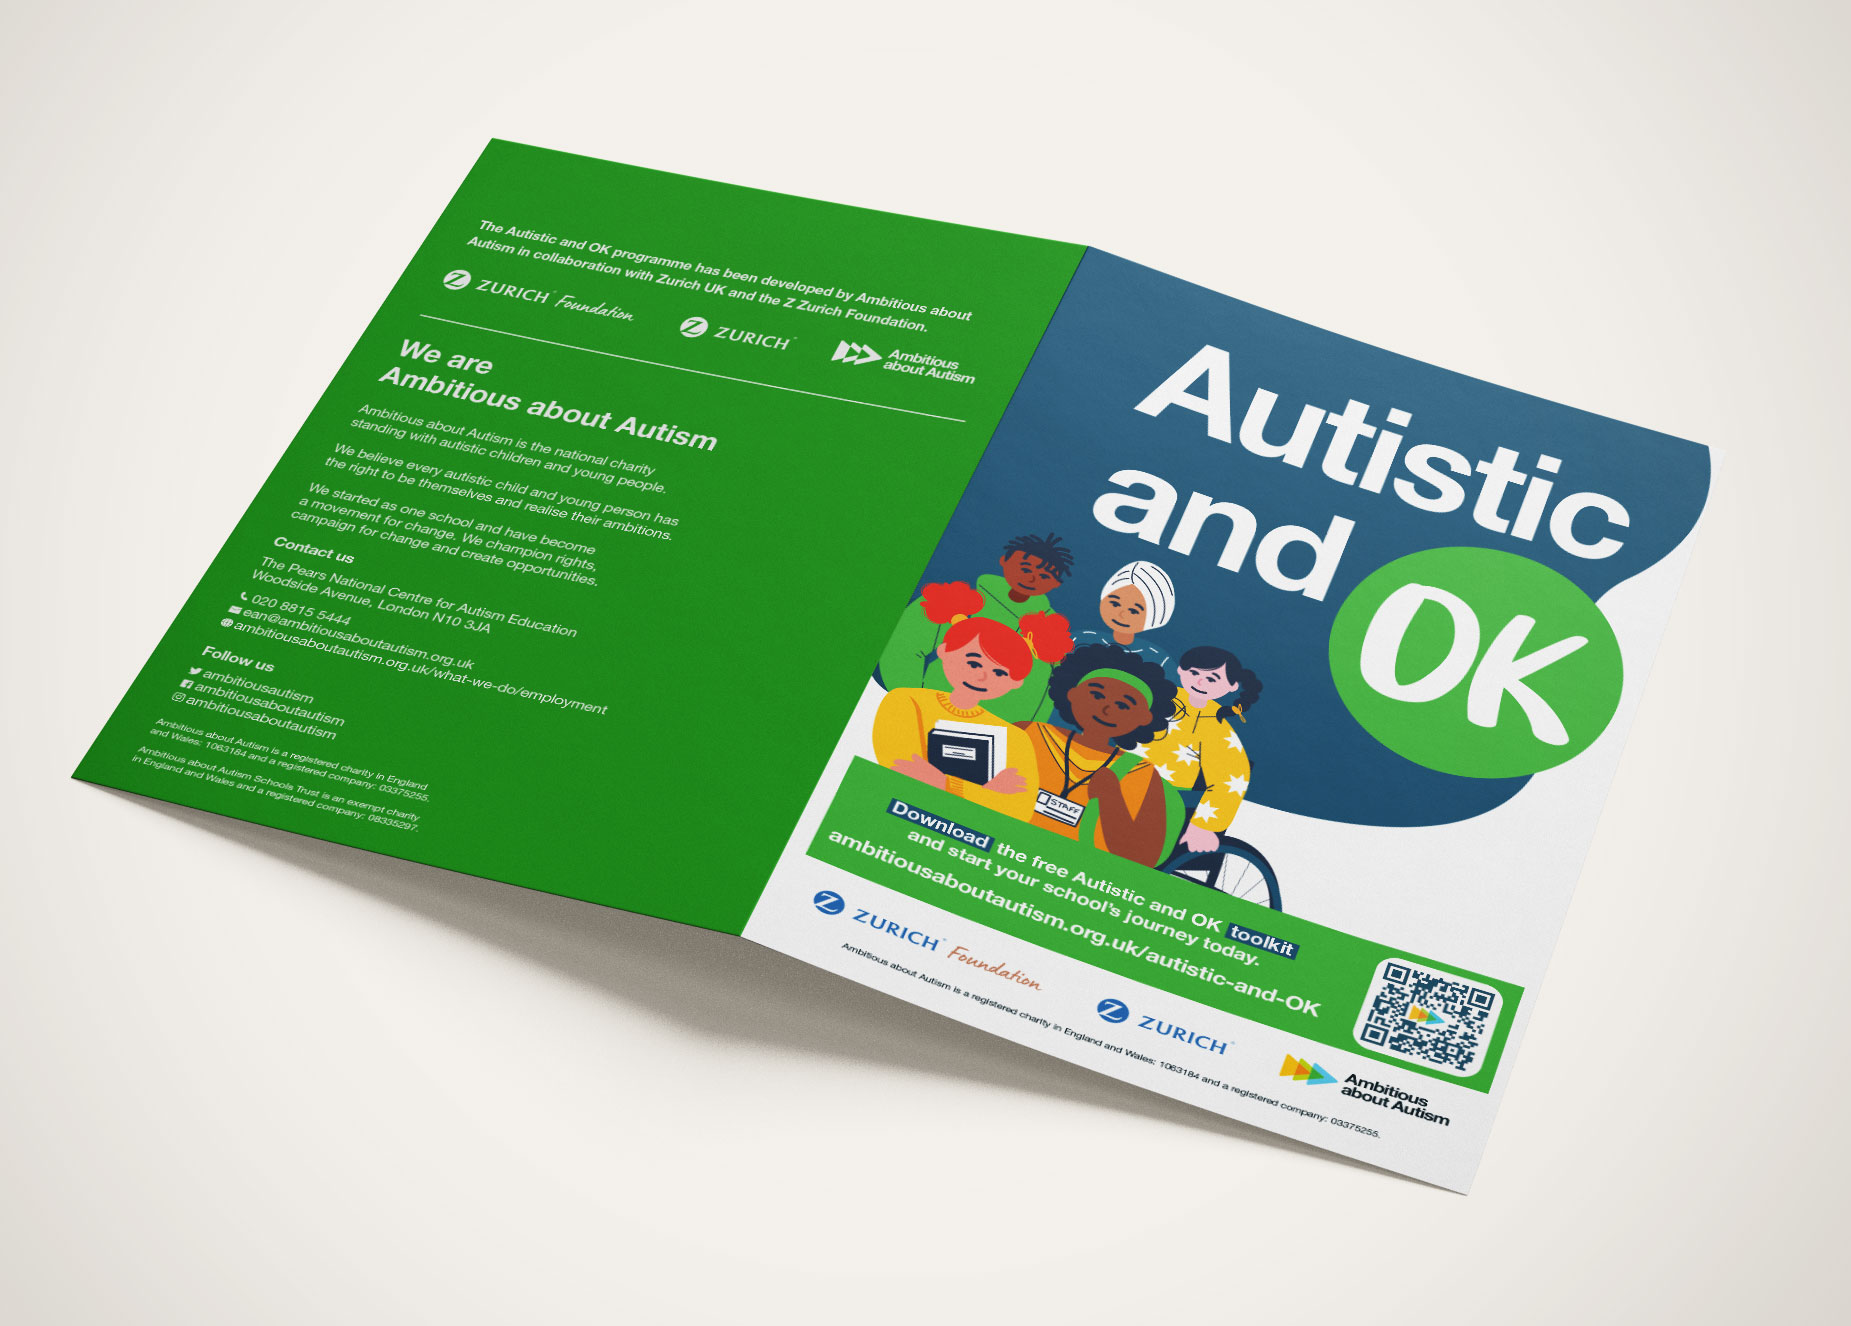 Ambitions about autism Autistic and OK toolkit